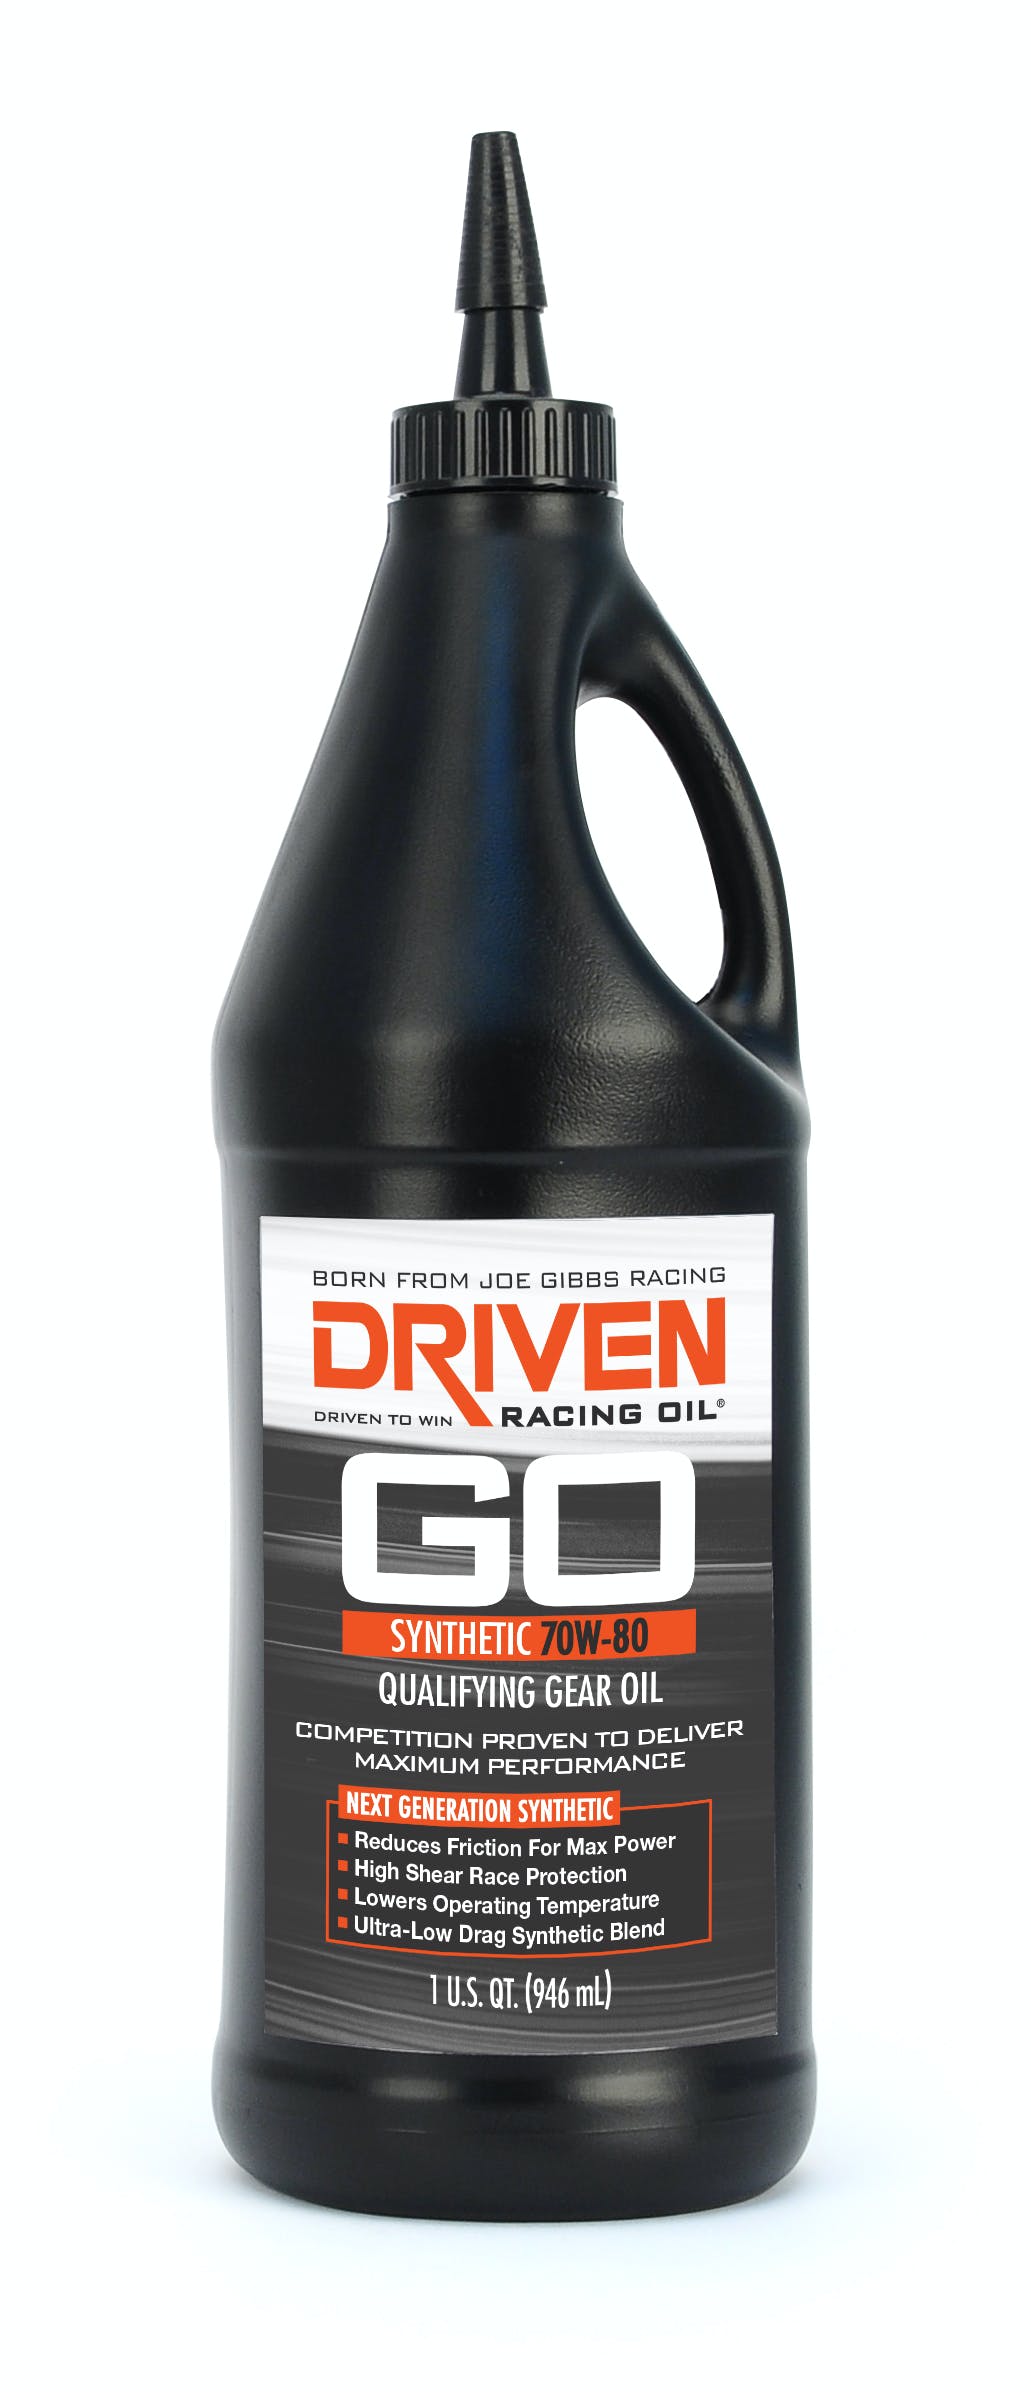 Driven Racing Oil 01130 Synthetic Qualifying Gear Oil 70W-80 (1 qt. bottle)